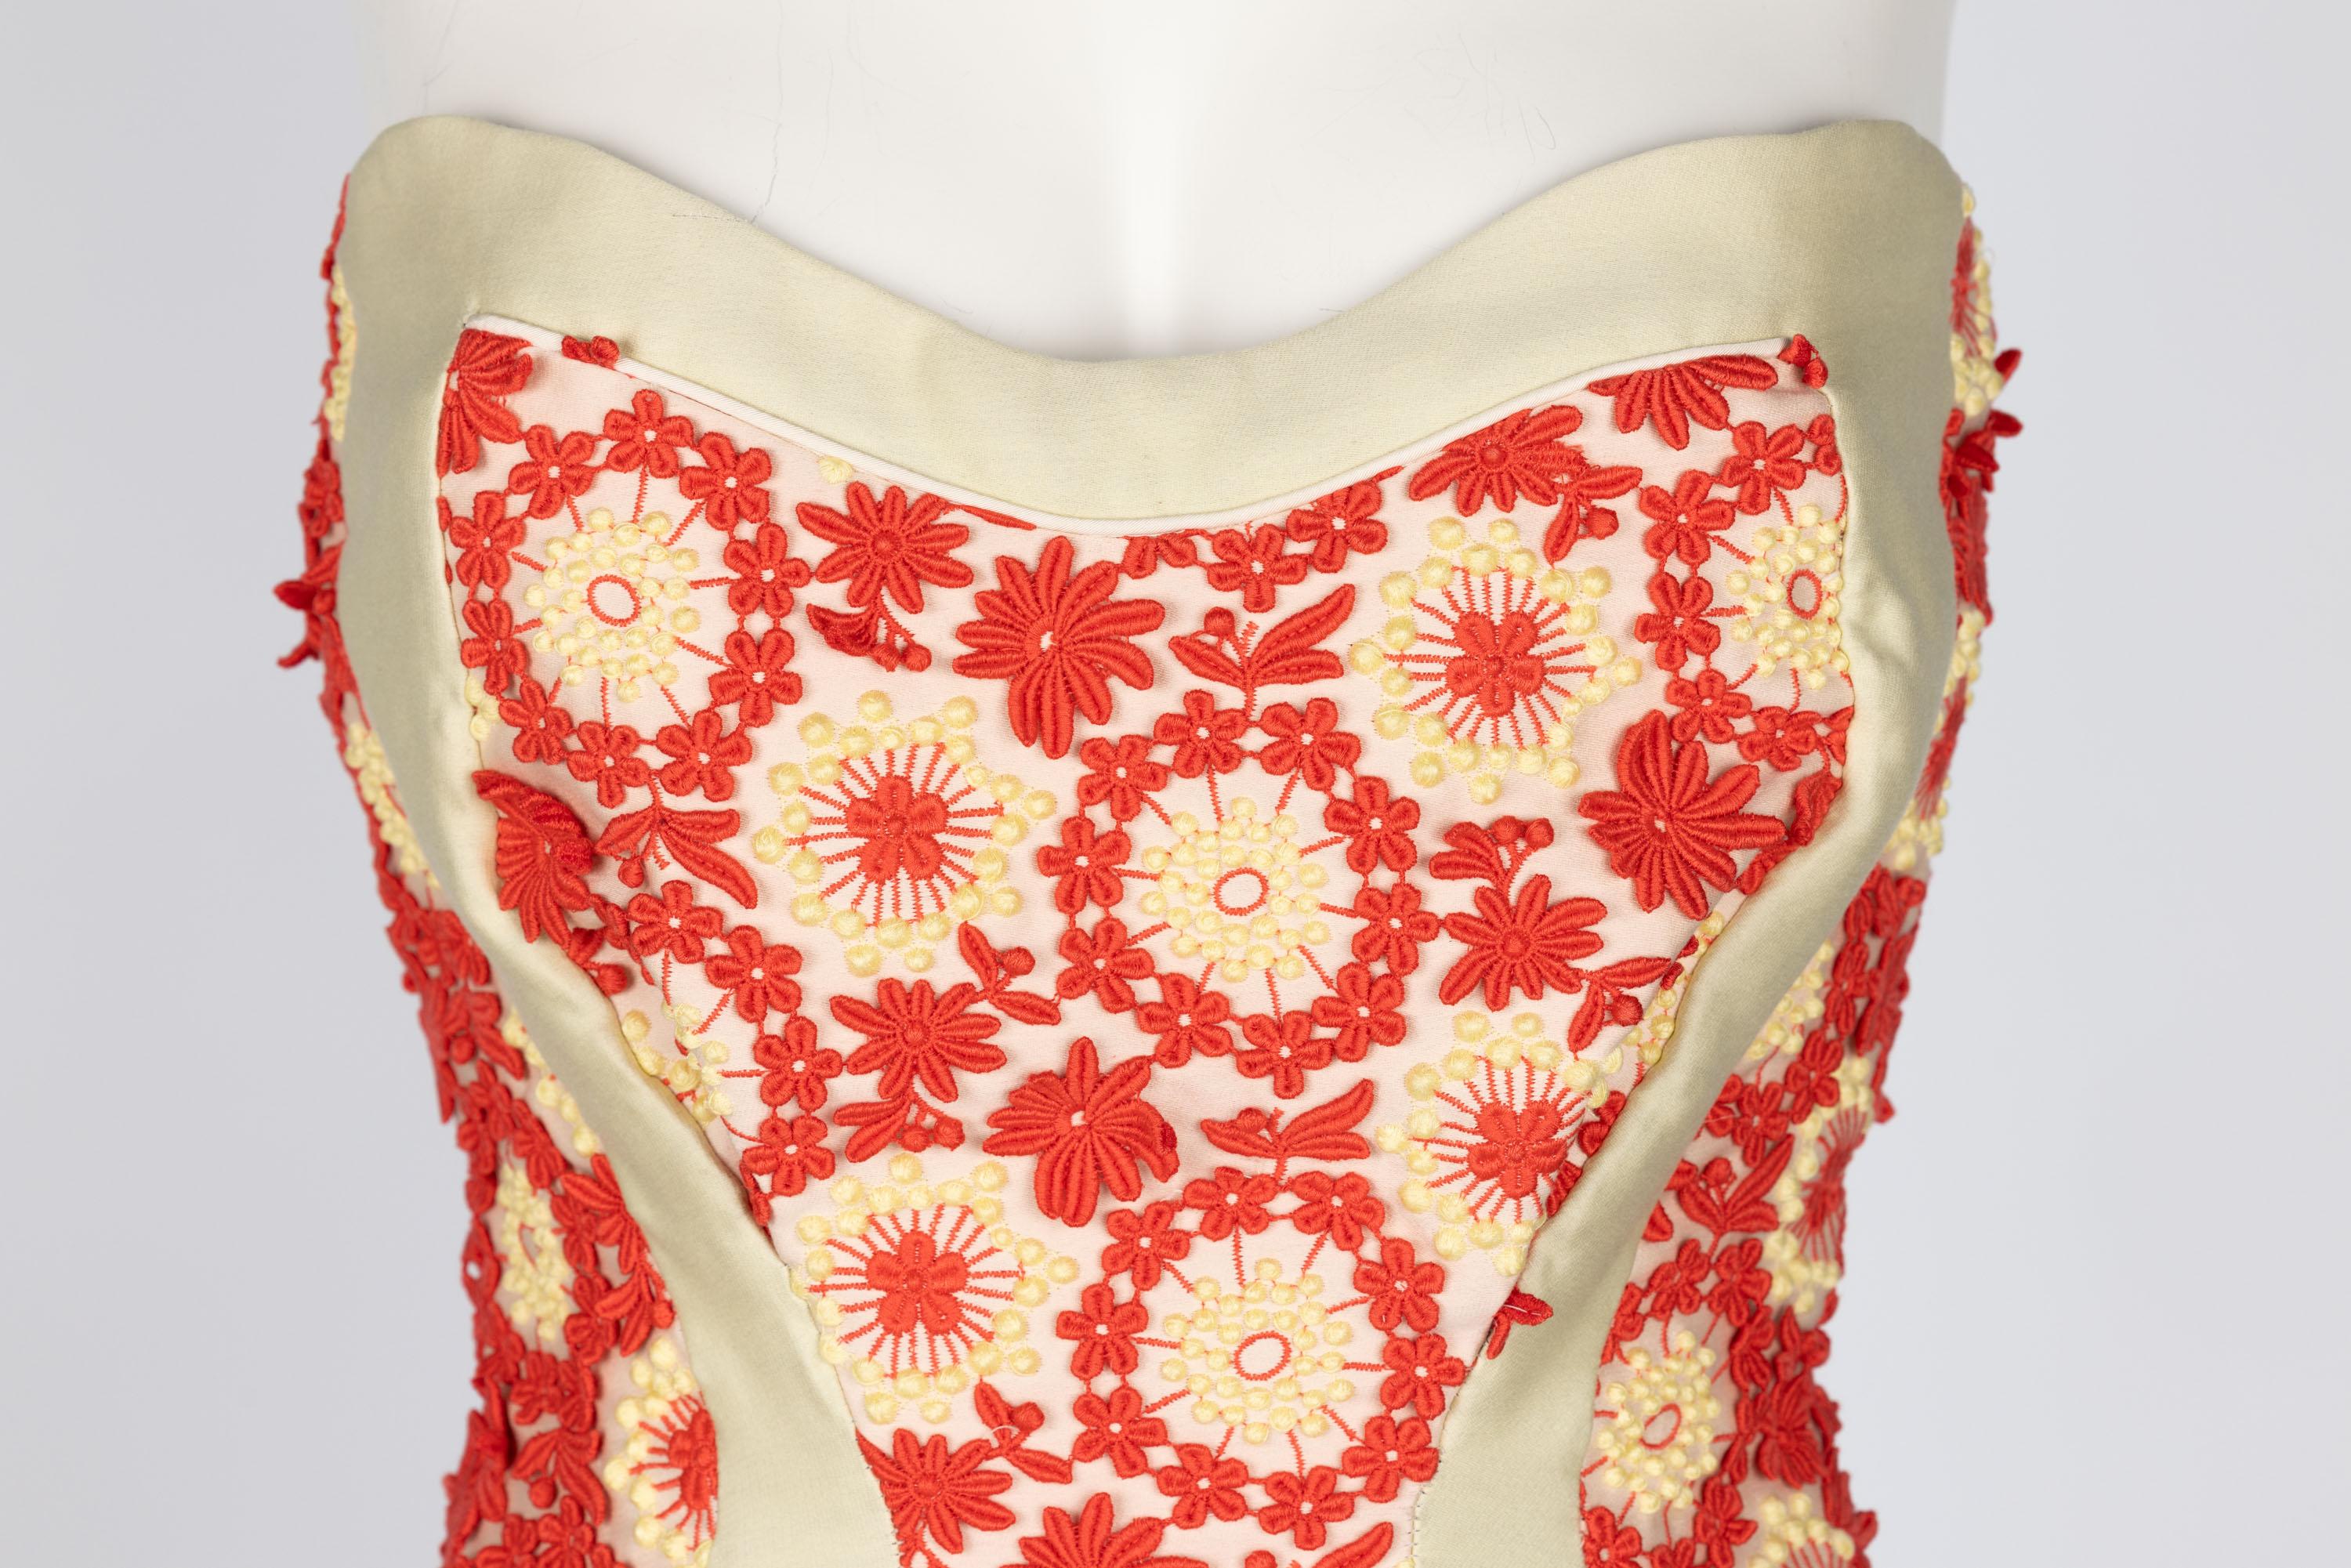 Prada Most Wanted Spring 2012 Floral Embroidered Pinup Bodysuit For Sale 3